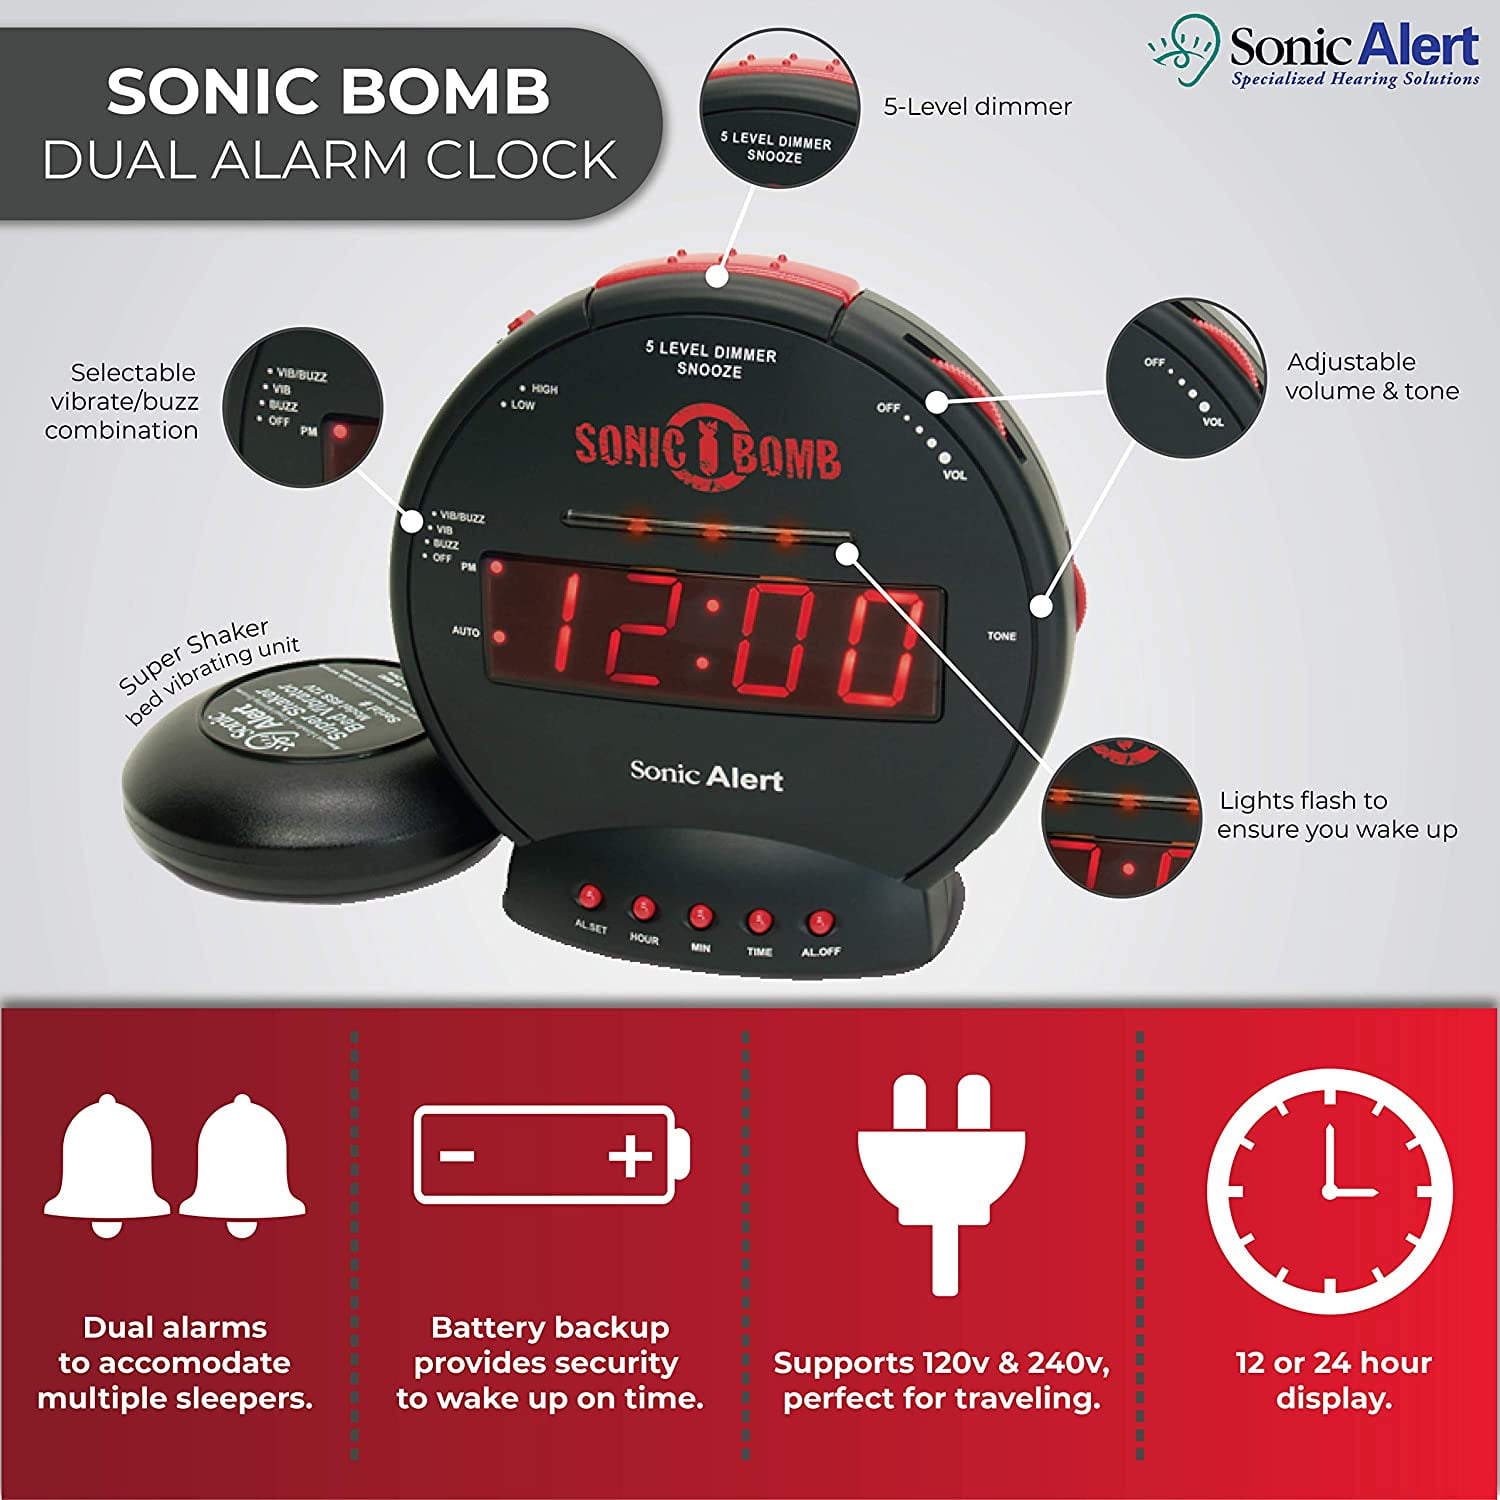 Sonic Alert - Sonic Bomb Dual Alarm Clock with Bed Shaker Vibrator and Digital Display - Black & Red - image 8 of 10